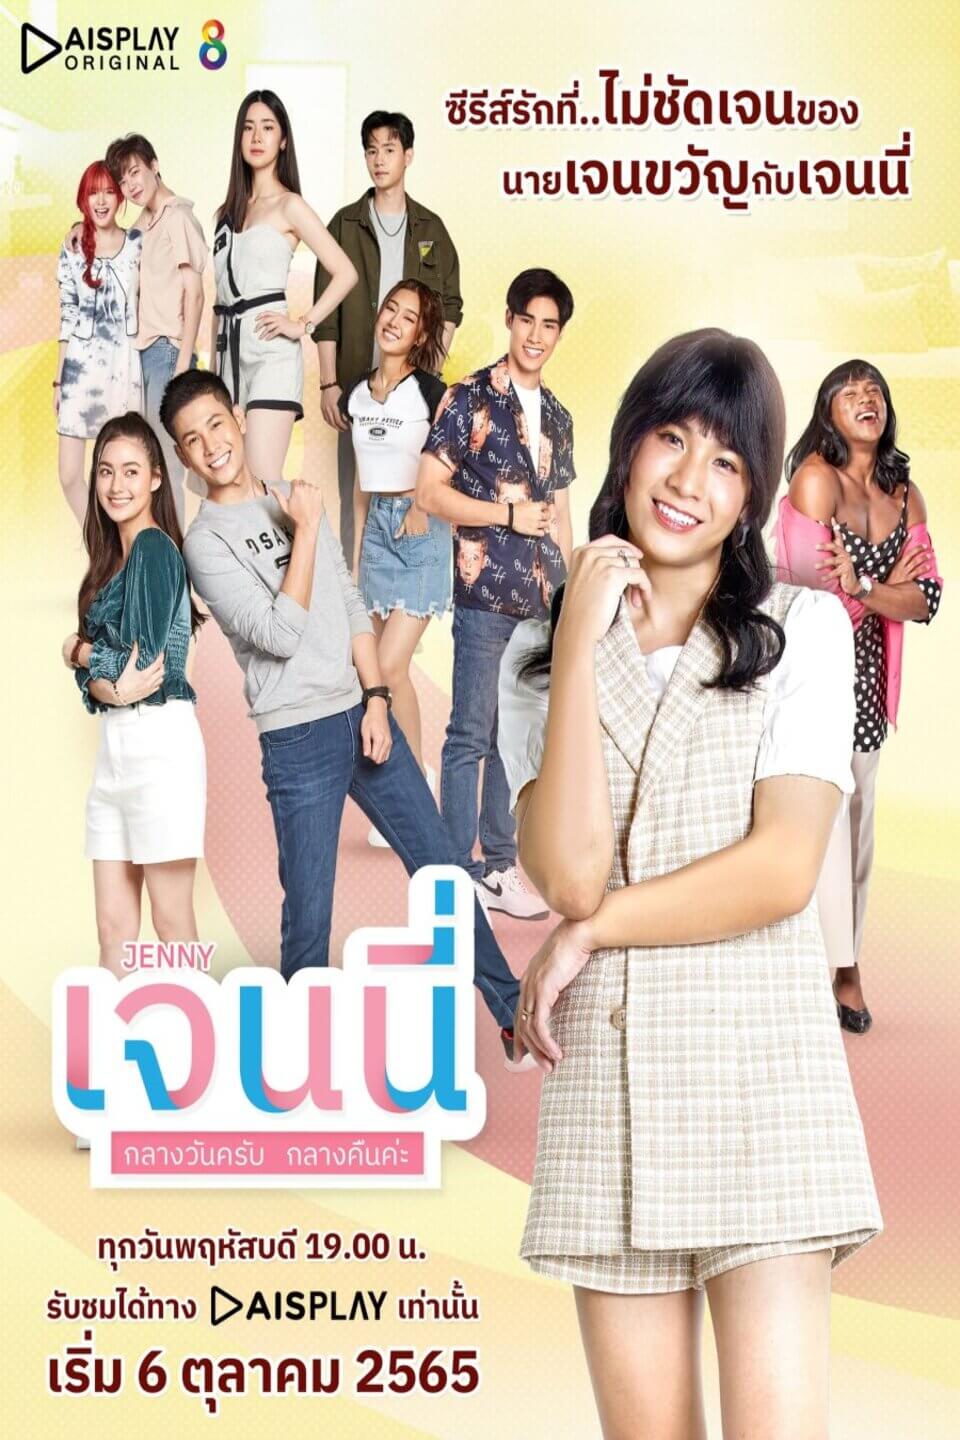 TV ratings for Jenny A.M/P.M (เจนนี่ กลางวันครับ กลางคืนค่ะ) in South Africa. Channel 8 TV series